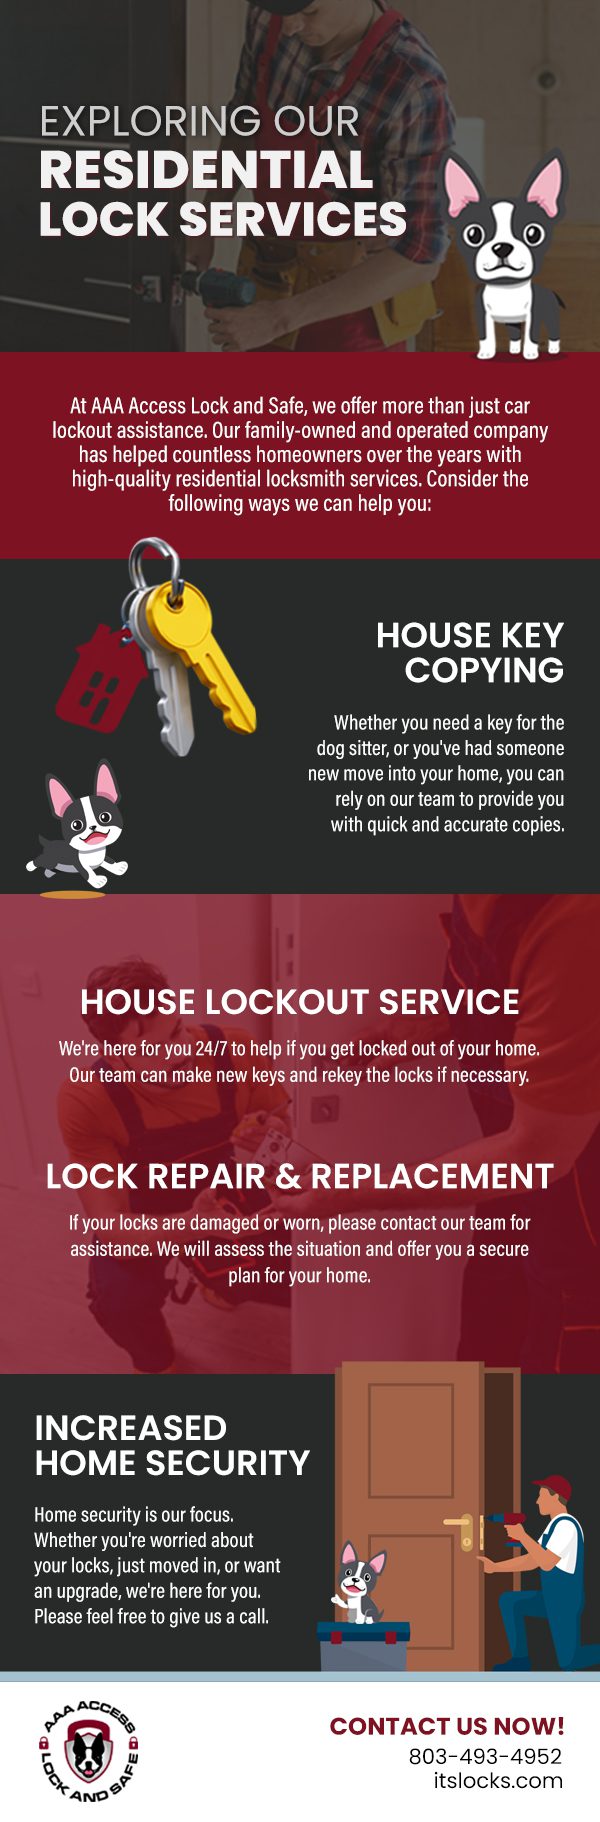 Exploring Our Residential Lock Services [infographic]